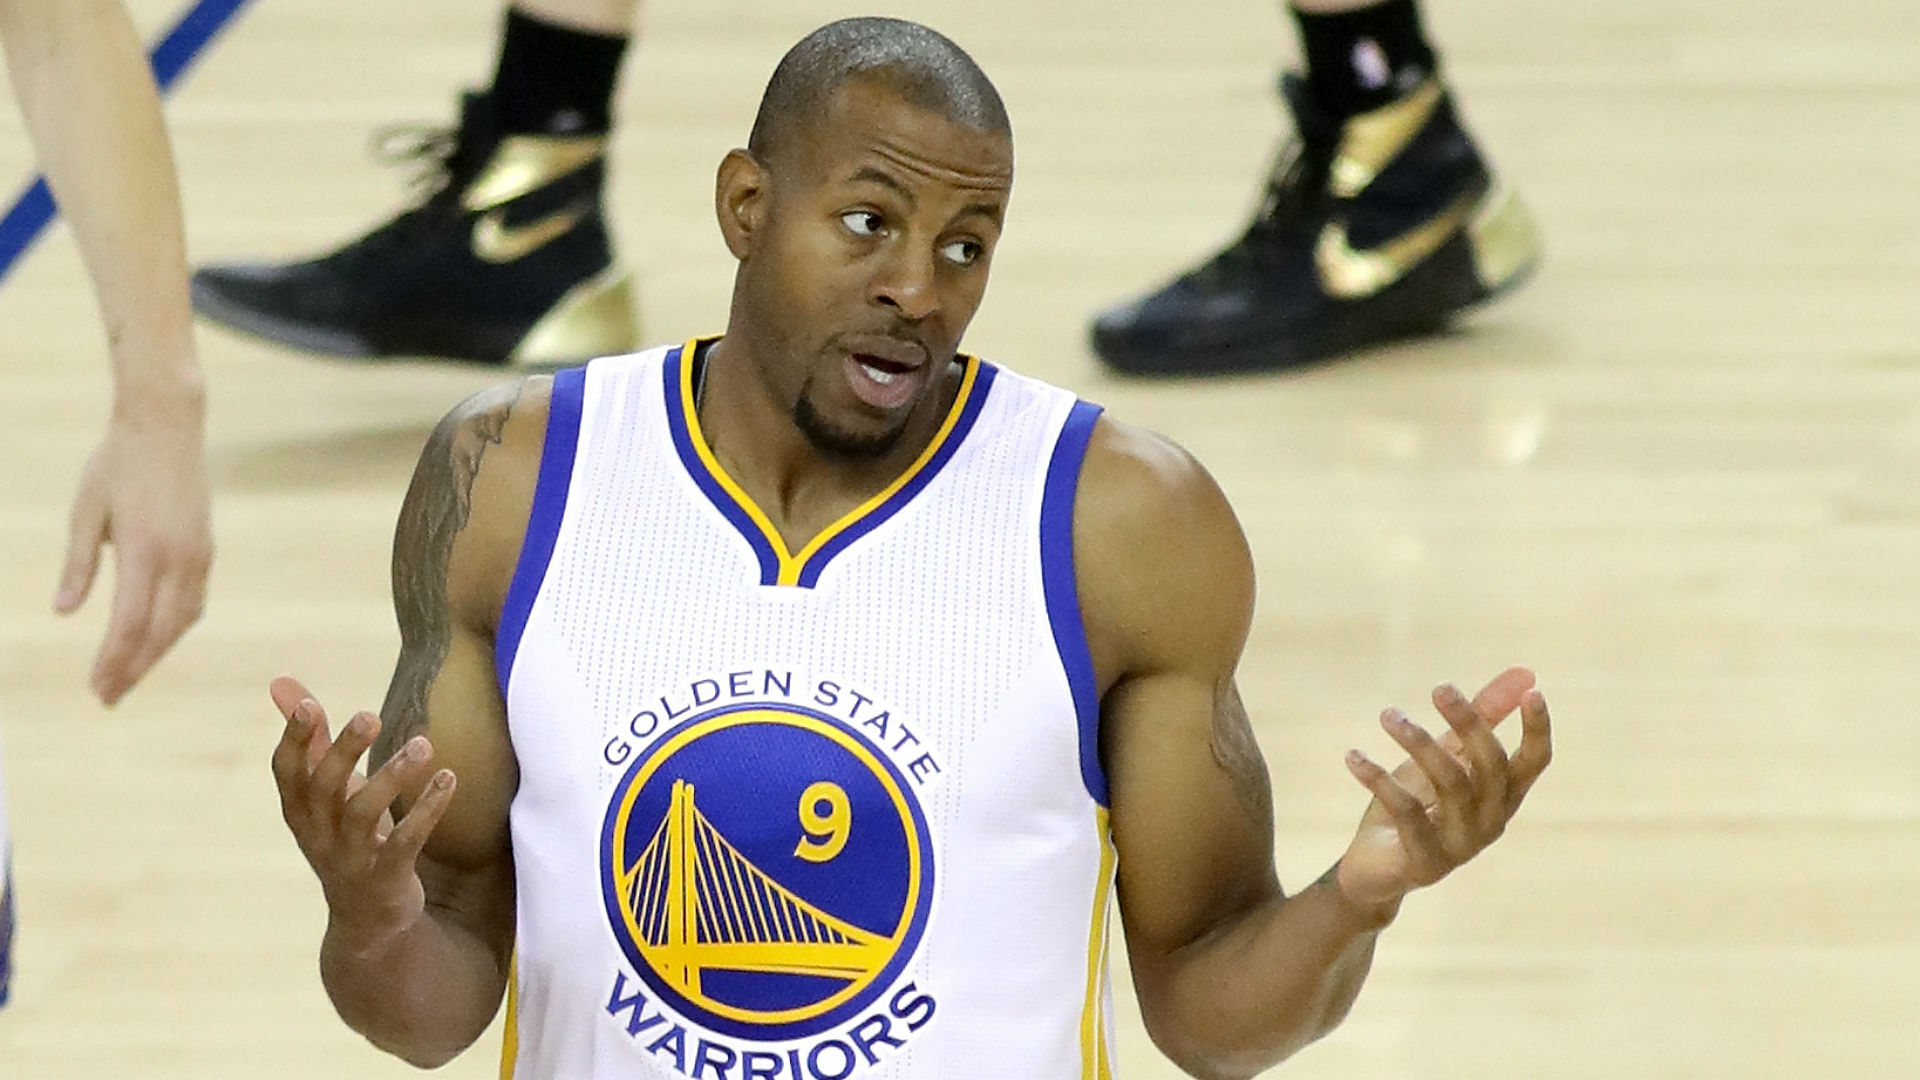 Andre Iguodala's race-related comments cause stir in locker room | NBA | Sporting News